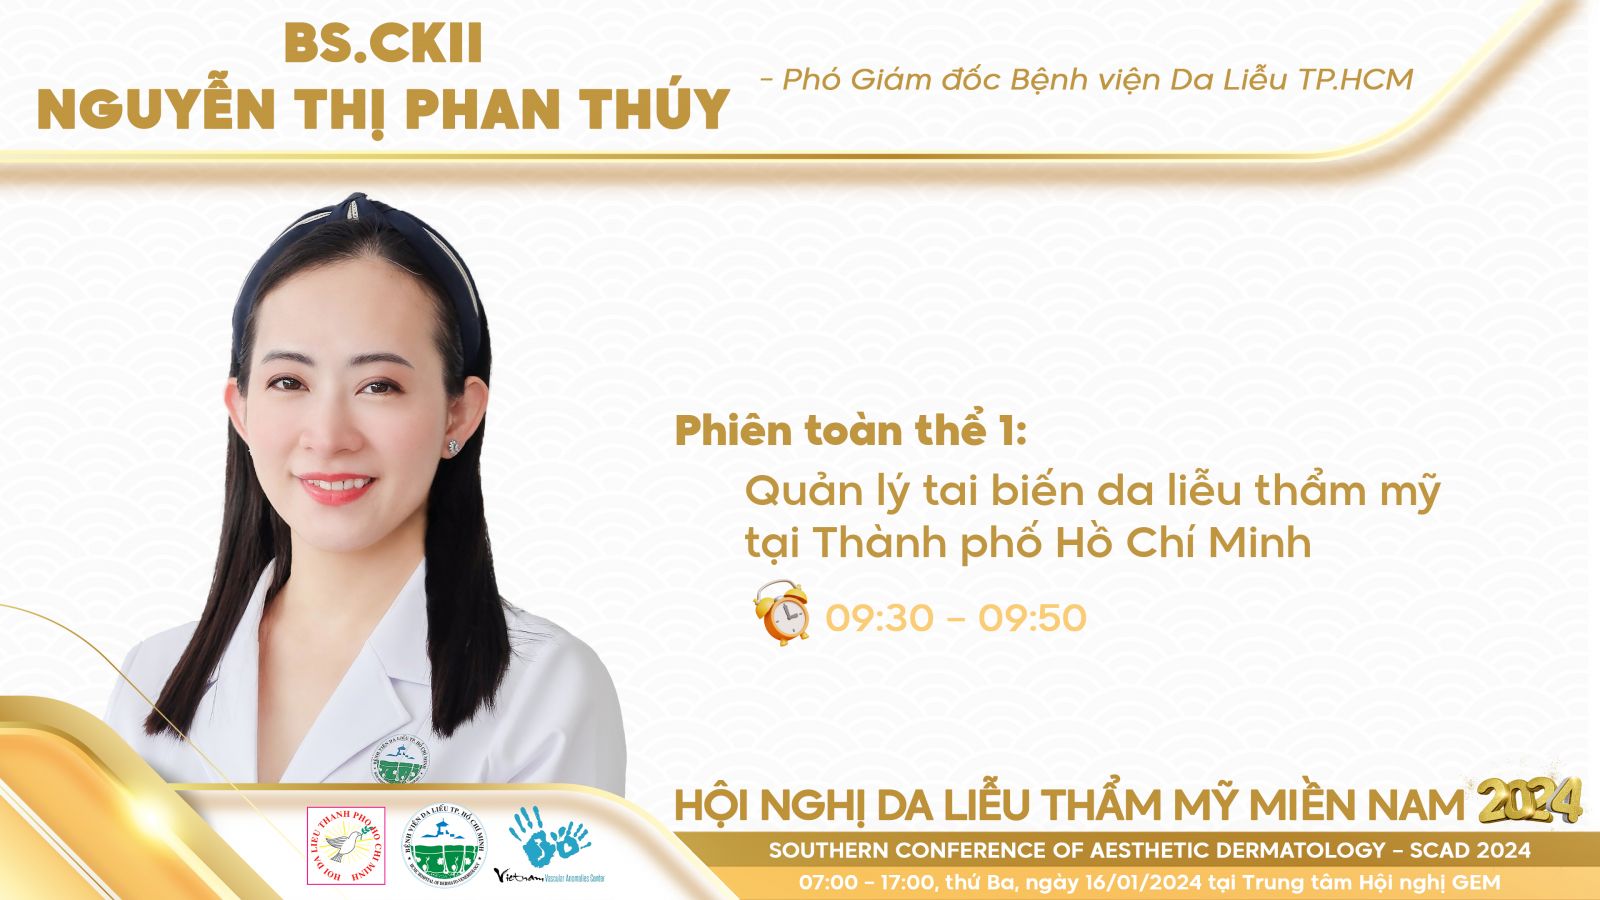 bvdl-hn-scad-2024-gioi-thieu-phien-toan-the-1-bs-thuy